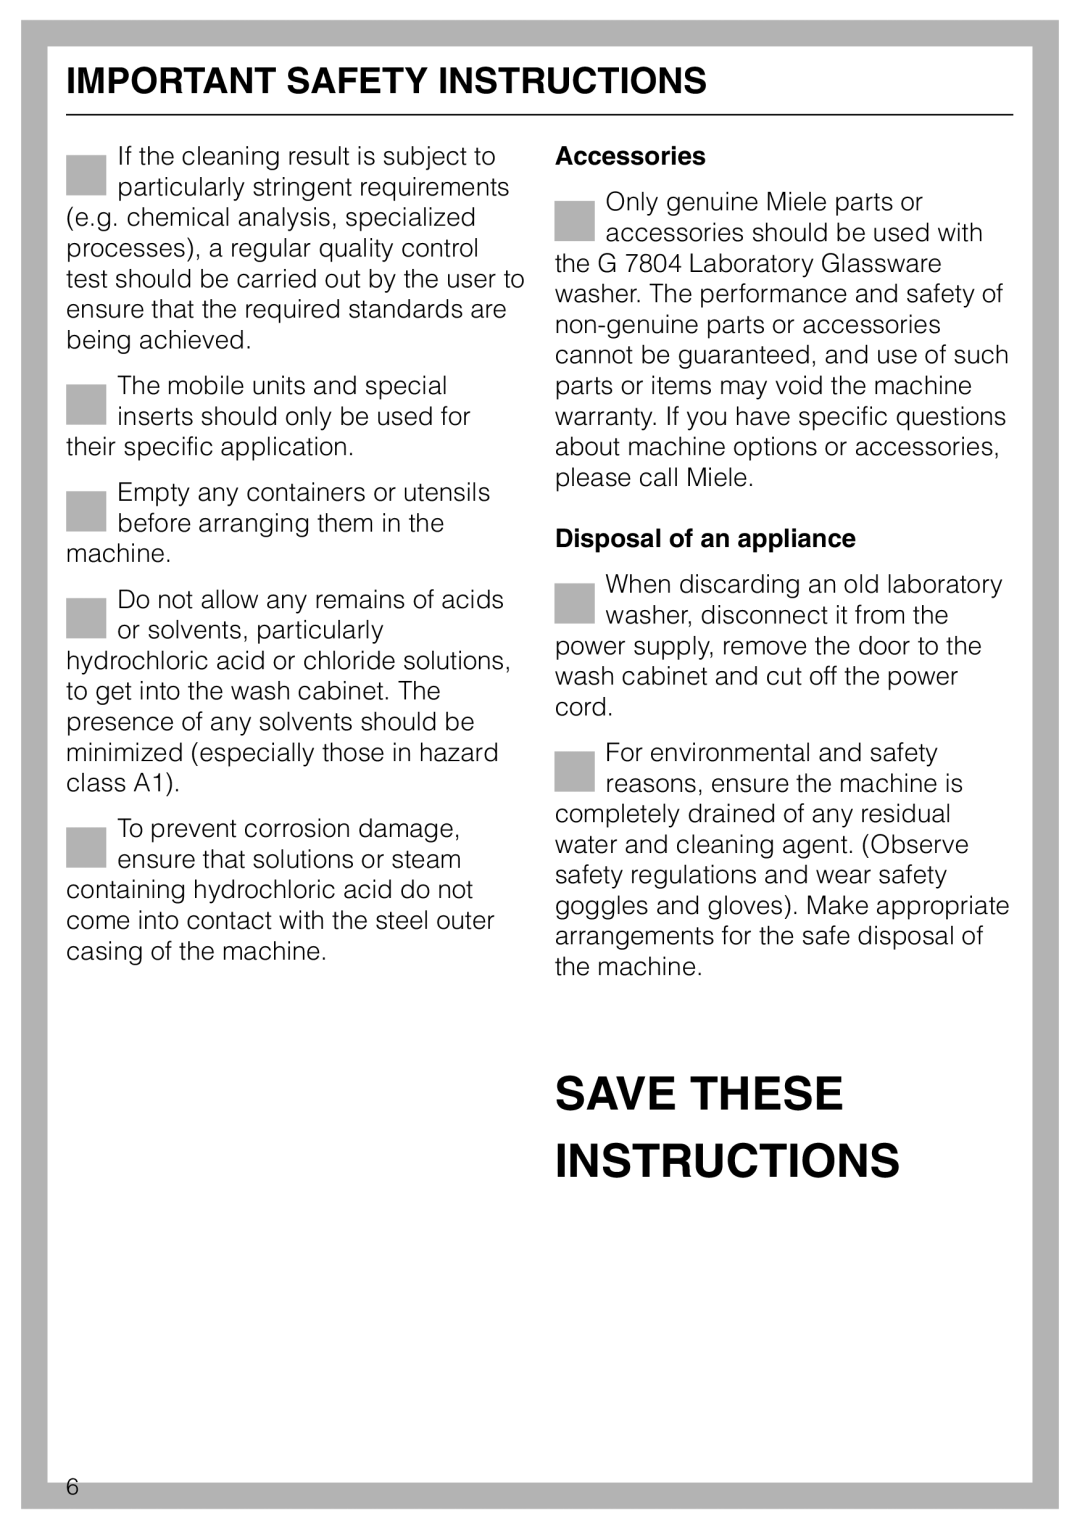 Miele G 7804 manual Save These Instructions, Important Safety Instructions, Accessories, Disposal of an appliance 